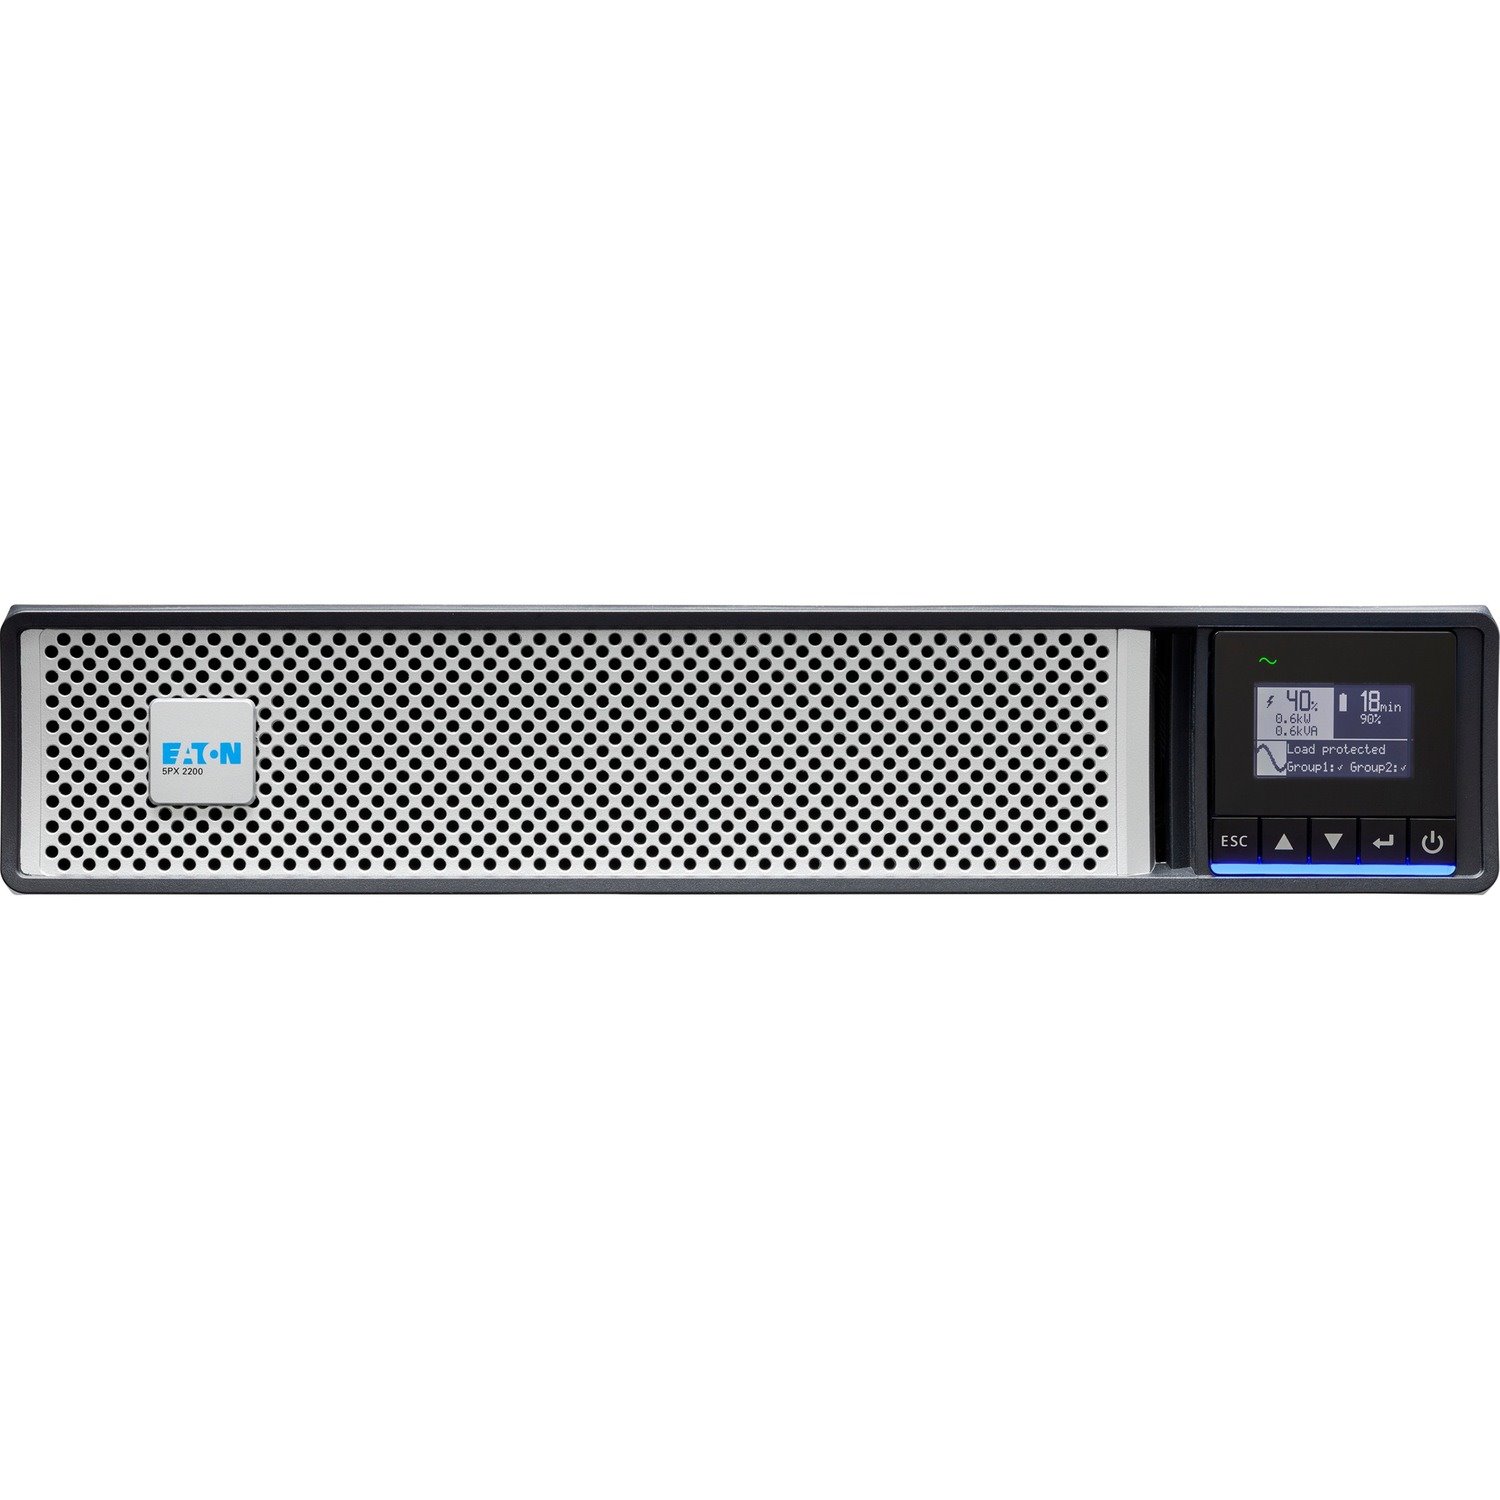 Eaton 5PX G2 2200VA 2200W 208V Line-Interactive UPS - 2 C19, 8 C13 Outlets, Cybersecure Network Card Option, Extended Run, 2U Rack/Tower